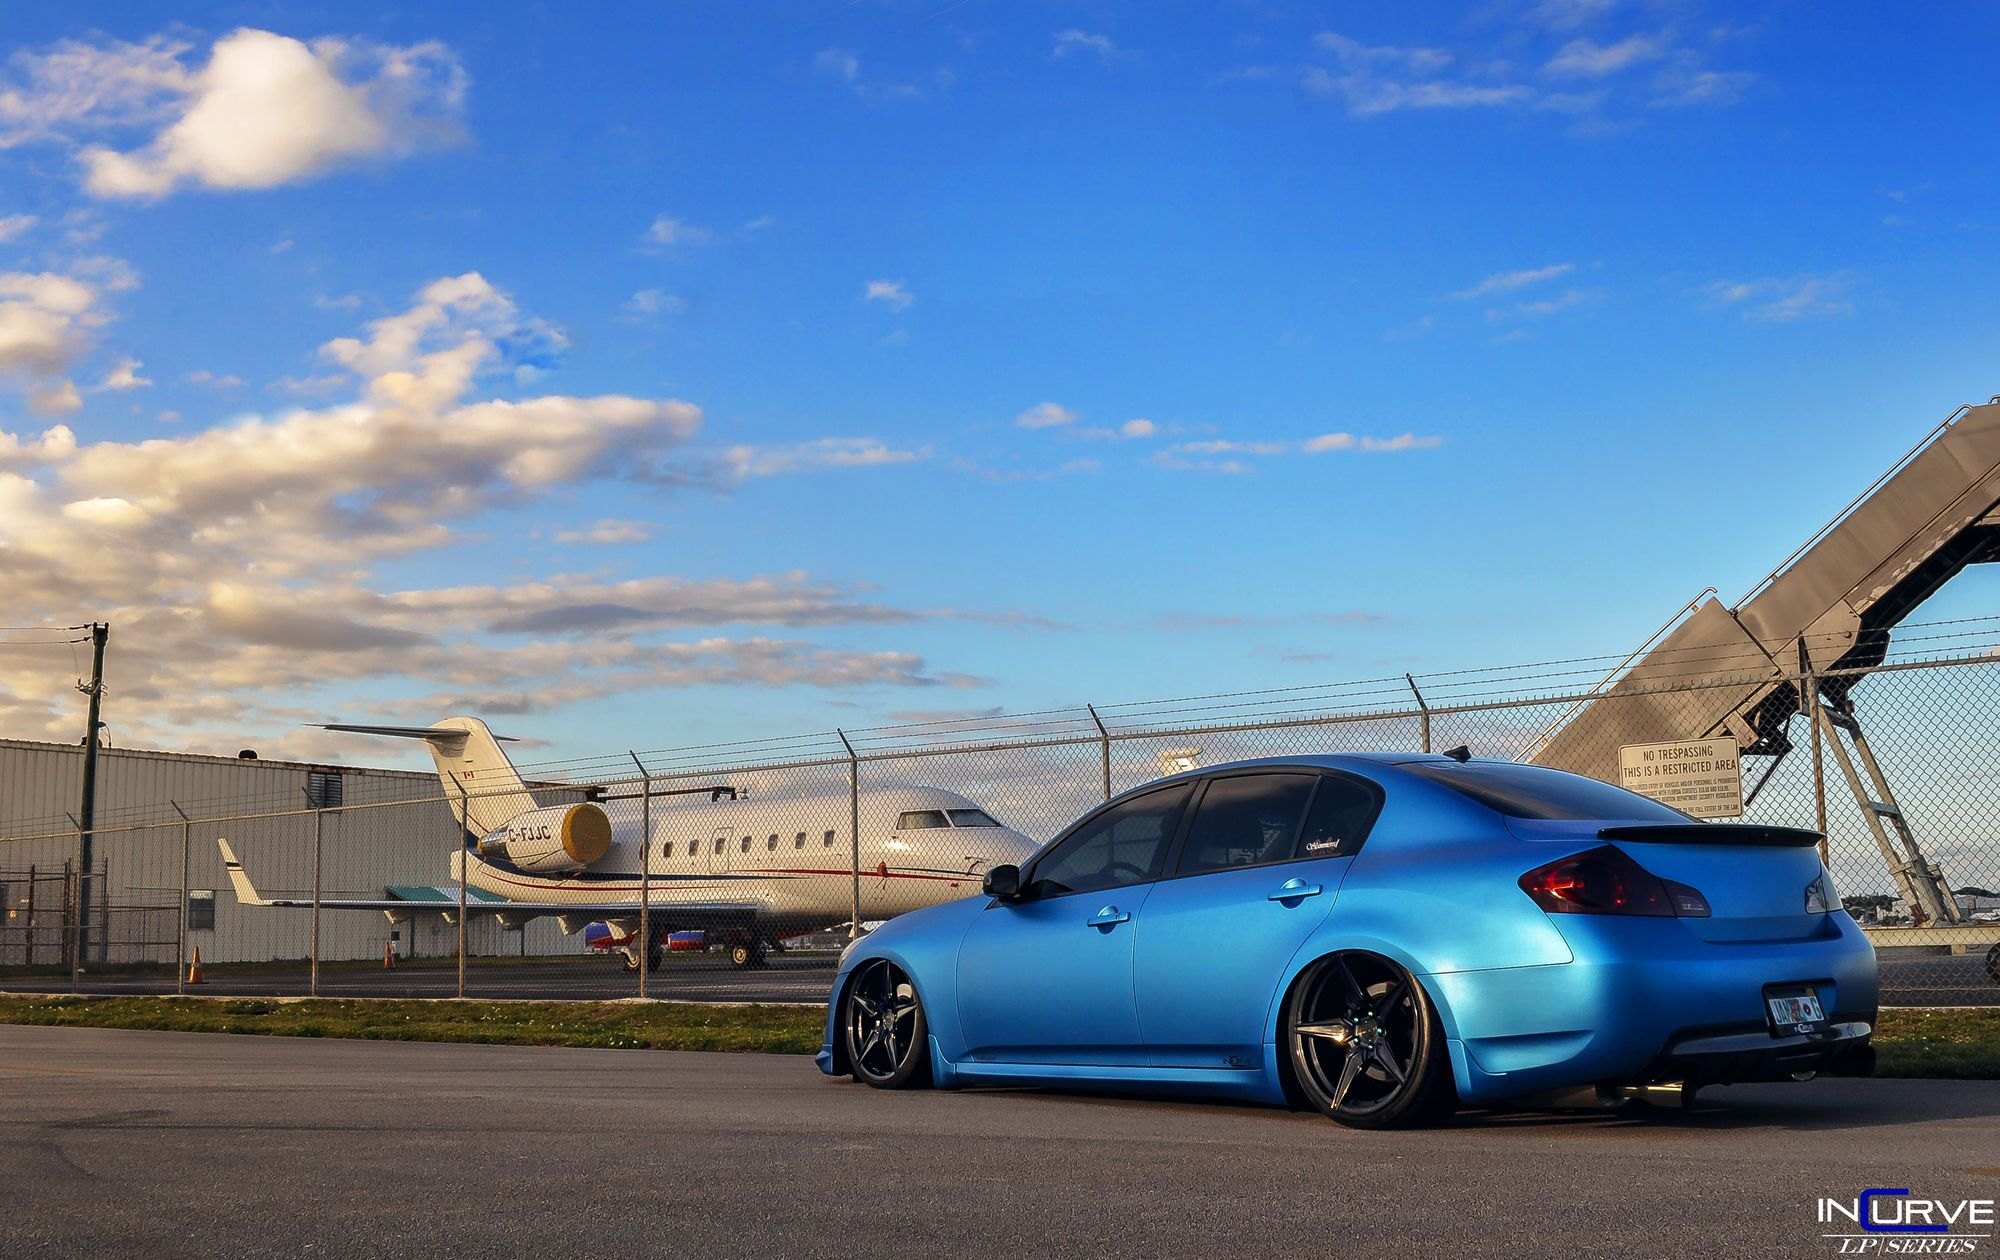 Blue Infiniti G35 with Rear Lip Spoiler - Photo by Incurve Wheels